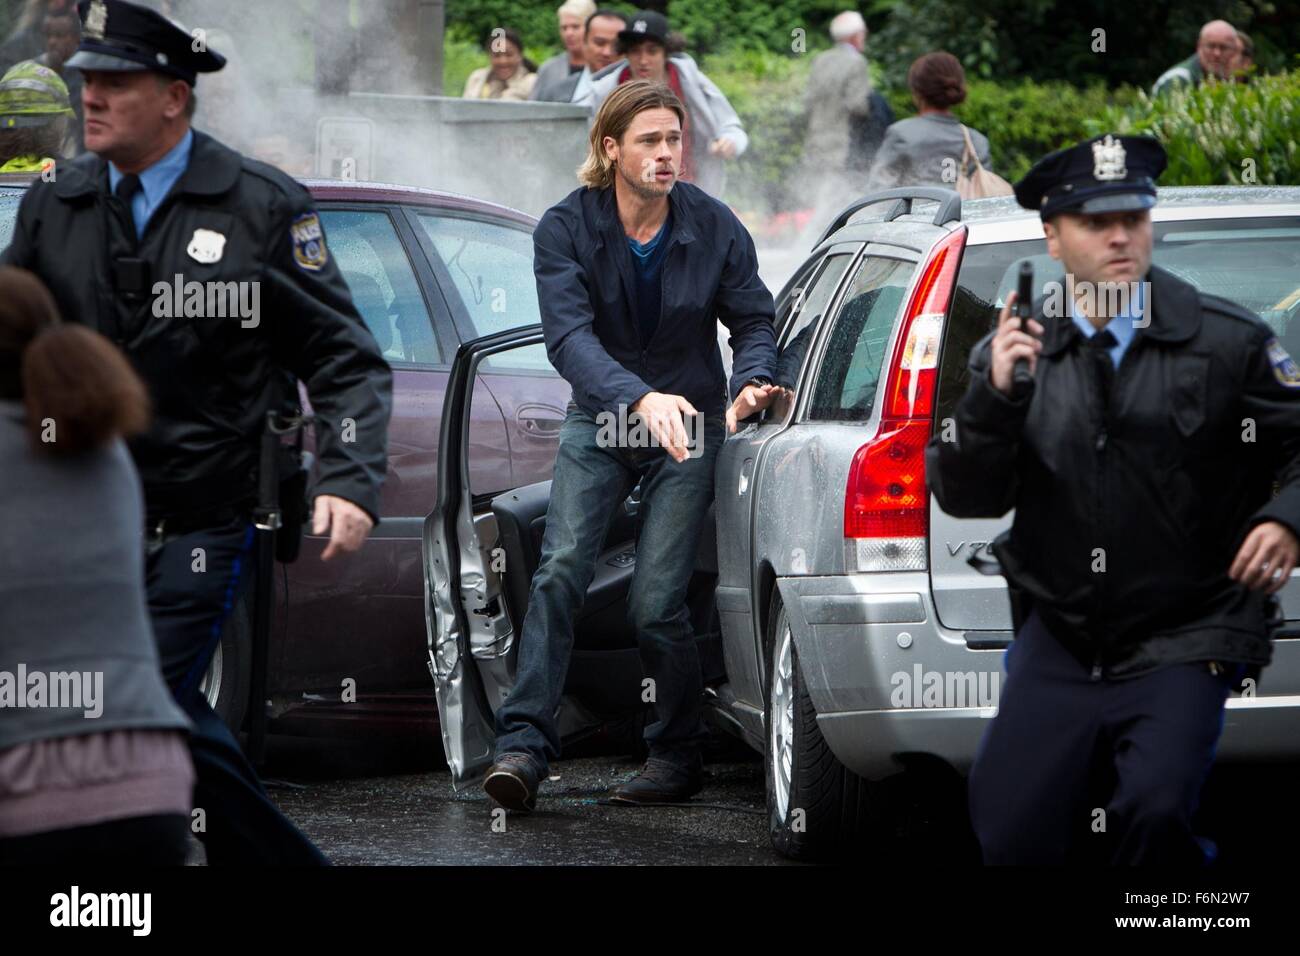 RELEASE DATE: June 21, 2013 TITLE: World War Z STUDIO: Paramount Pictures DIRECTOR: Marc Forster. PLOT: A U.N. employee is racing against time and fate, as he travels the world trying to stop the outbreak of a deadly Zombie pandemic PICTURED: BRAD PITT as Gerry Lane (Credit: c Plan B Entertainment/Entertainment Pictures) Stock Photo